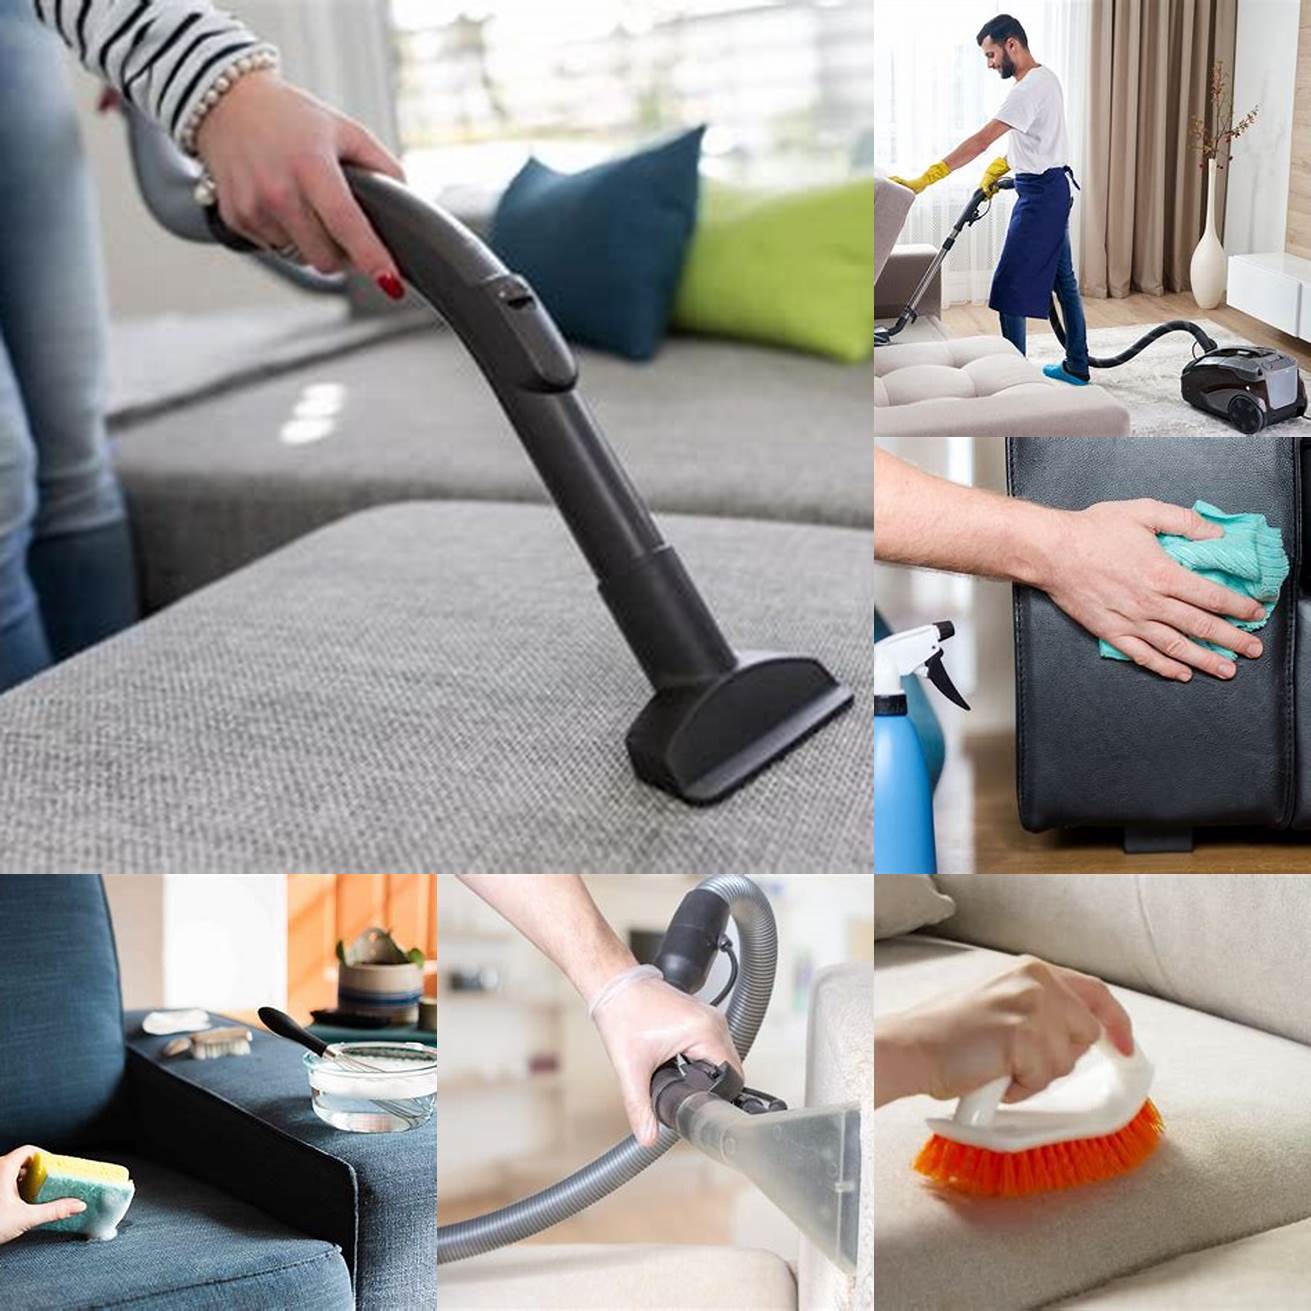 Vacuum or brush the sofa regularly to remove dust and dirt Use a soft-bristled brush or a vacuum cleaner with a soft brush attachment to avoid damaging the fabric or leather